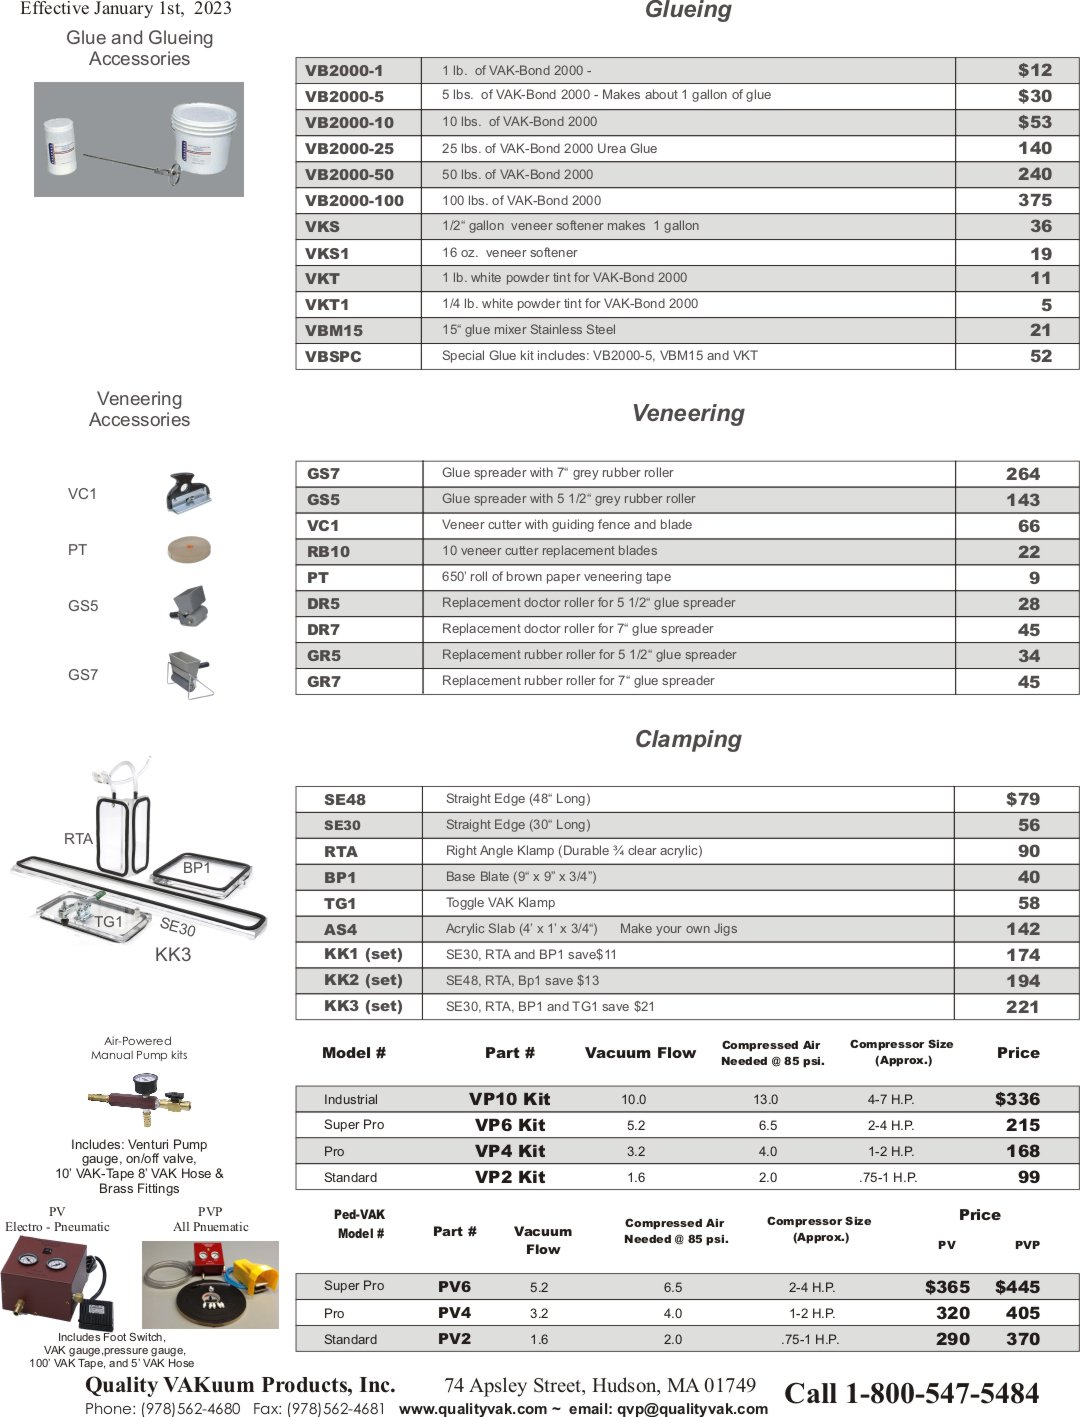 Pricing guide page 4